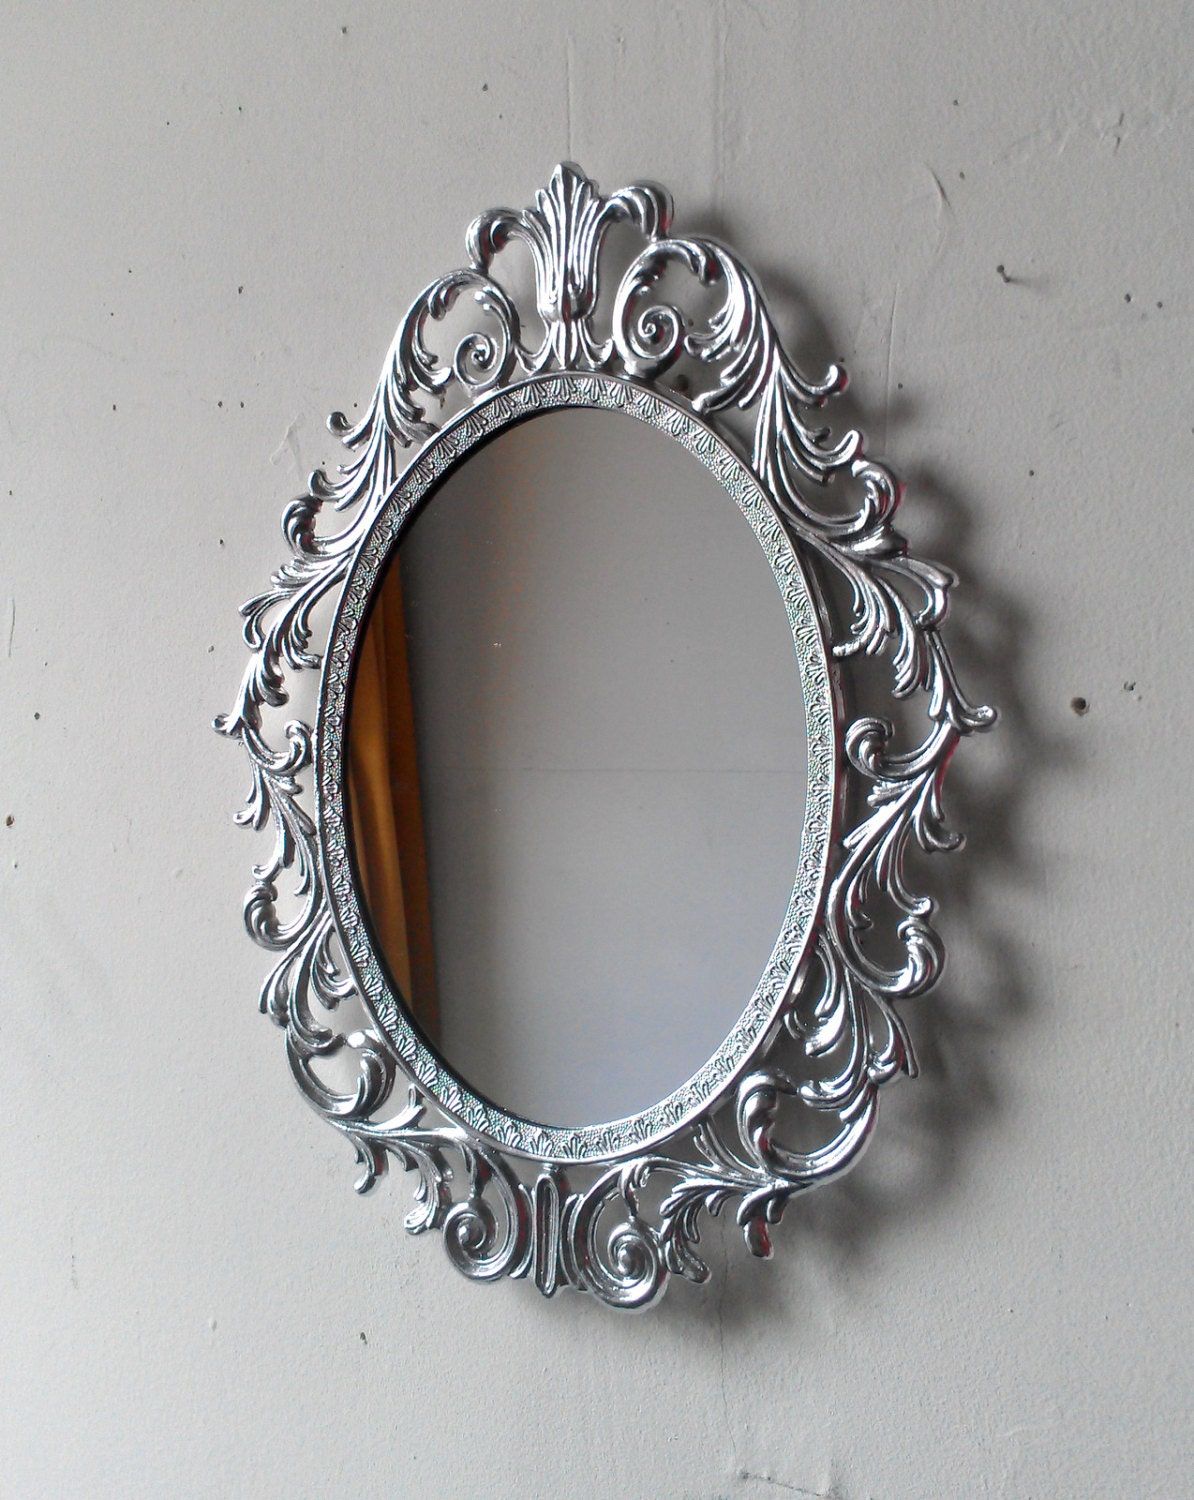 Silver Princess Mirror Ornate Metal Oval Filigree Frame 13 In Metallic Silver Framed Wall Mirrors (View 13 of 15)